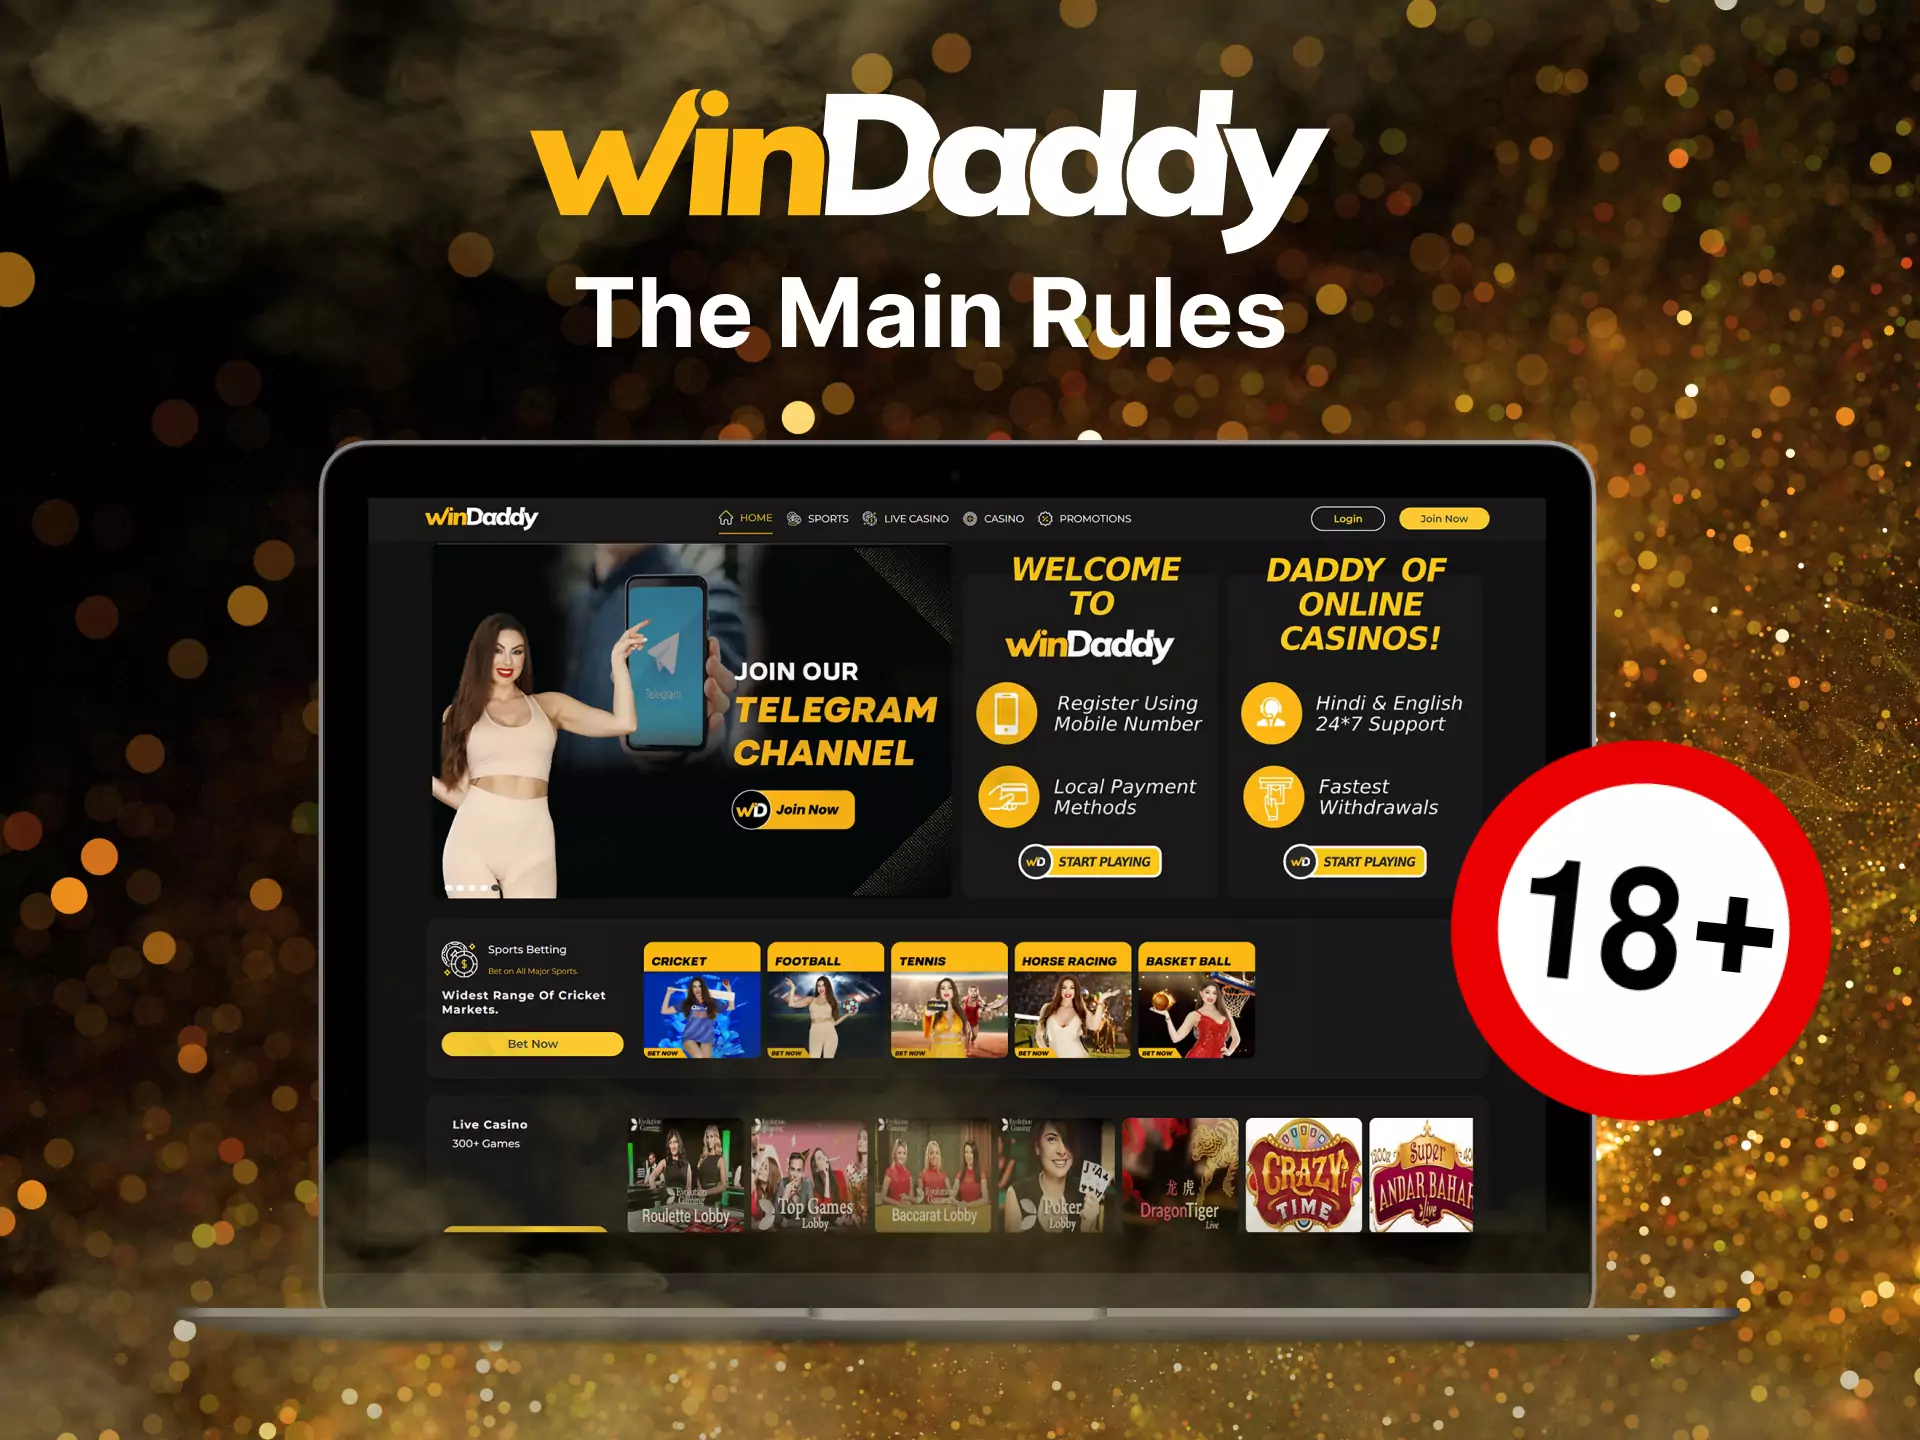 The main rules of Windaddy are simple and clear, read the instructions.